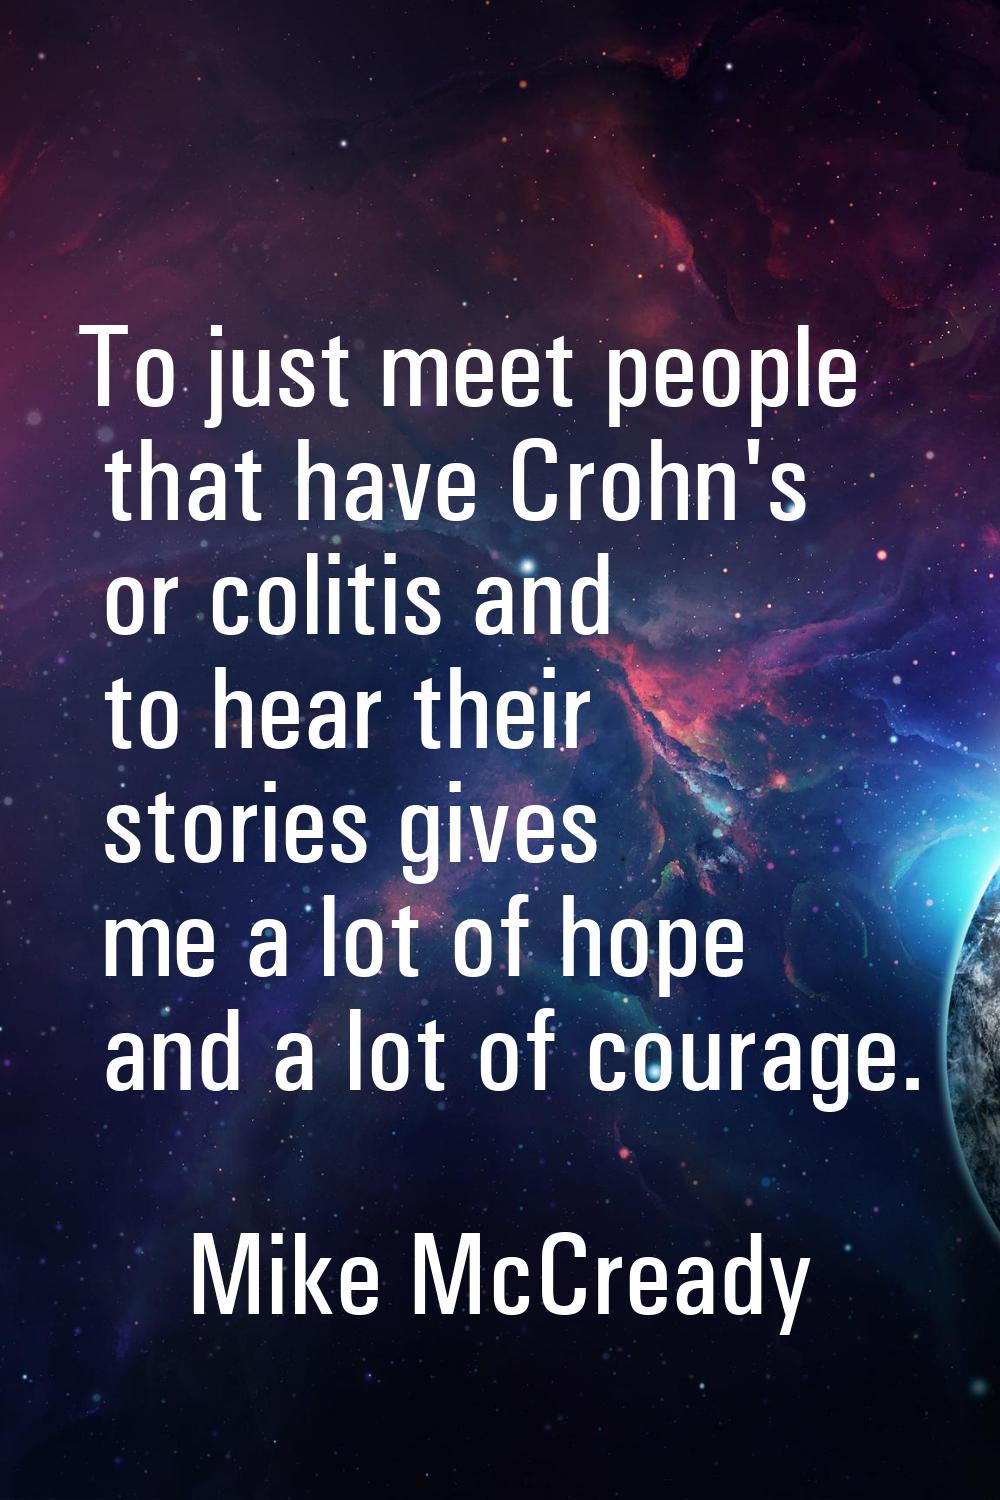 To just meet people that have Crohn's or colitis and to hear their stories gives me a lot of hope a